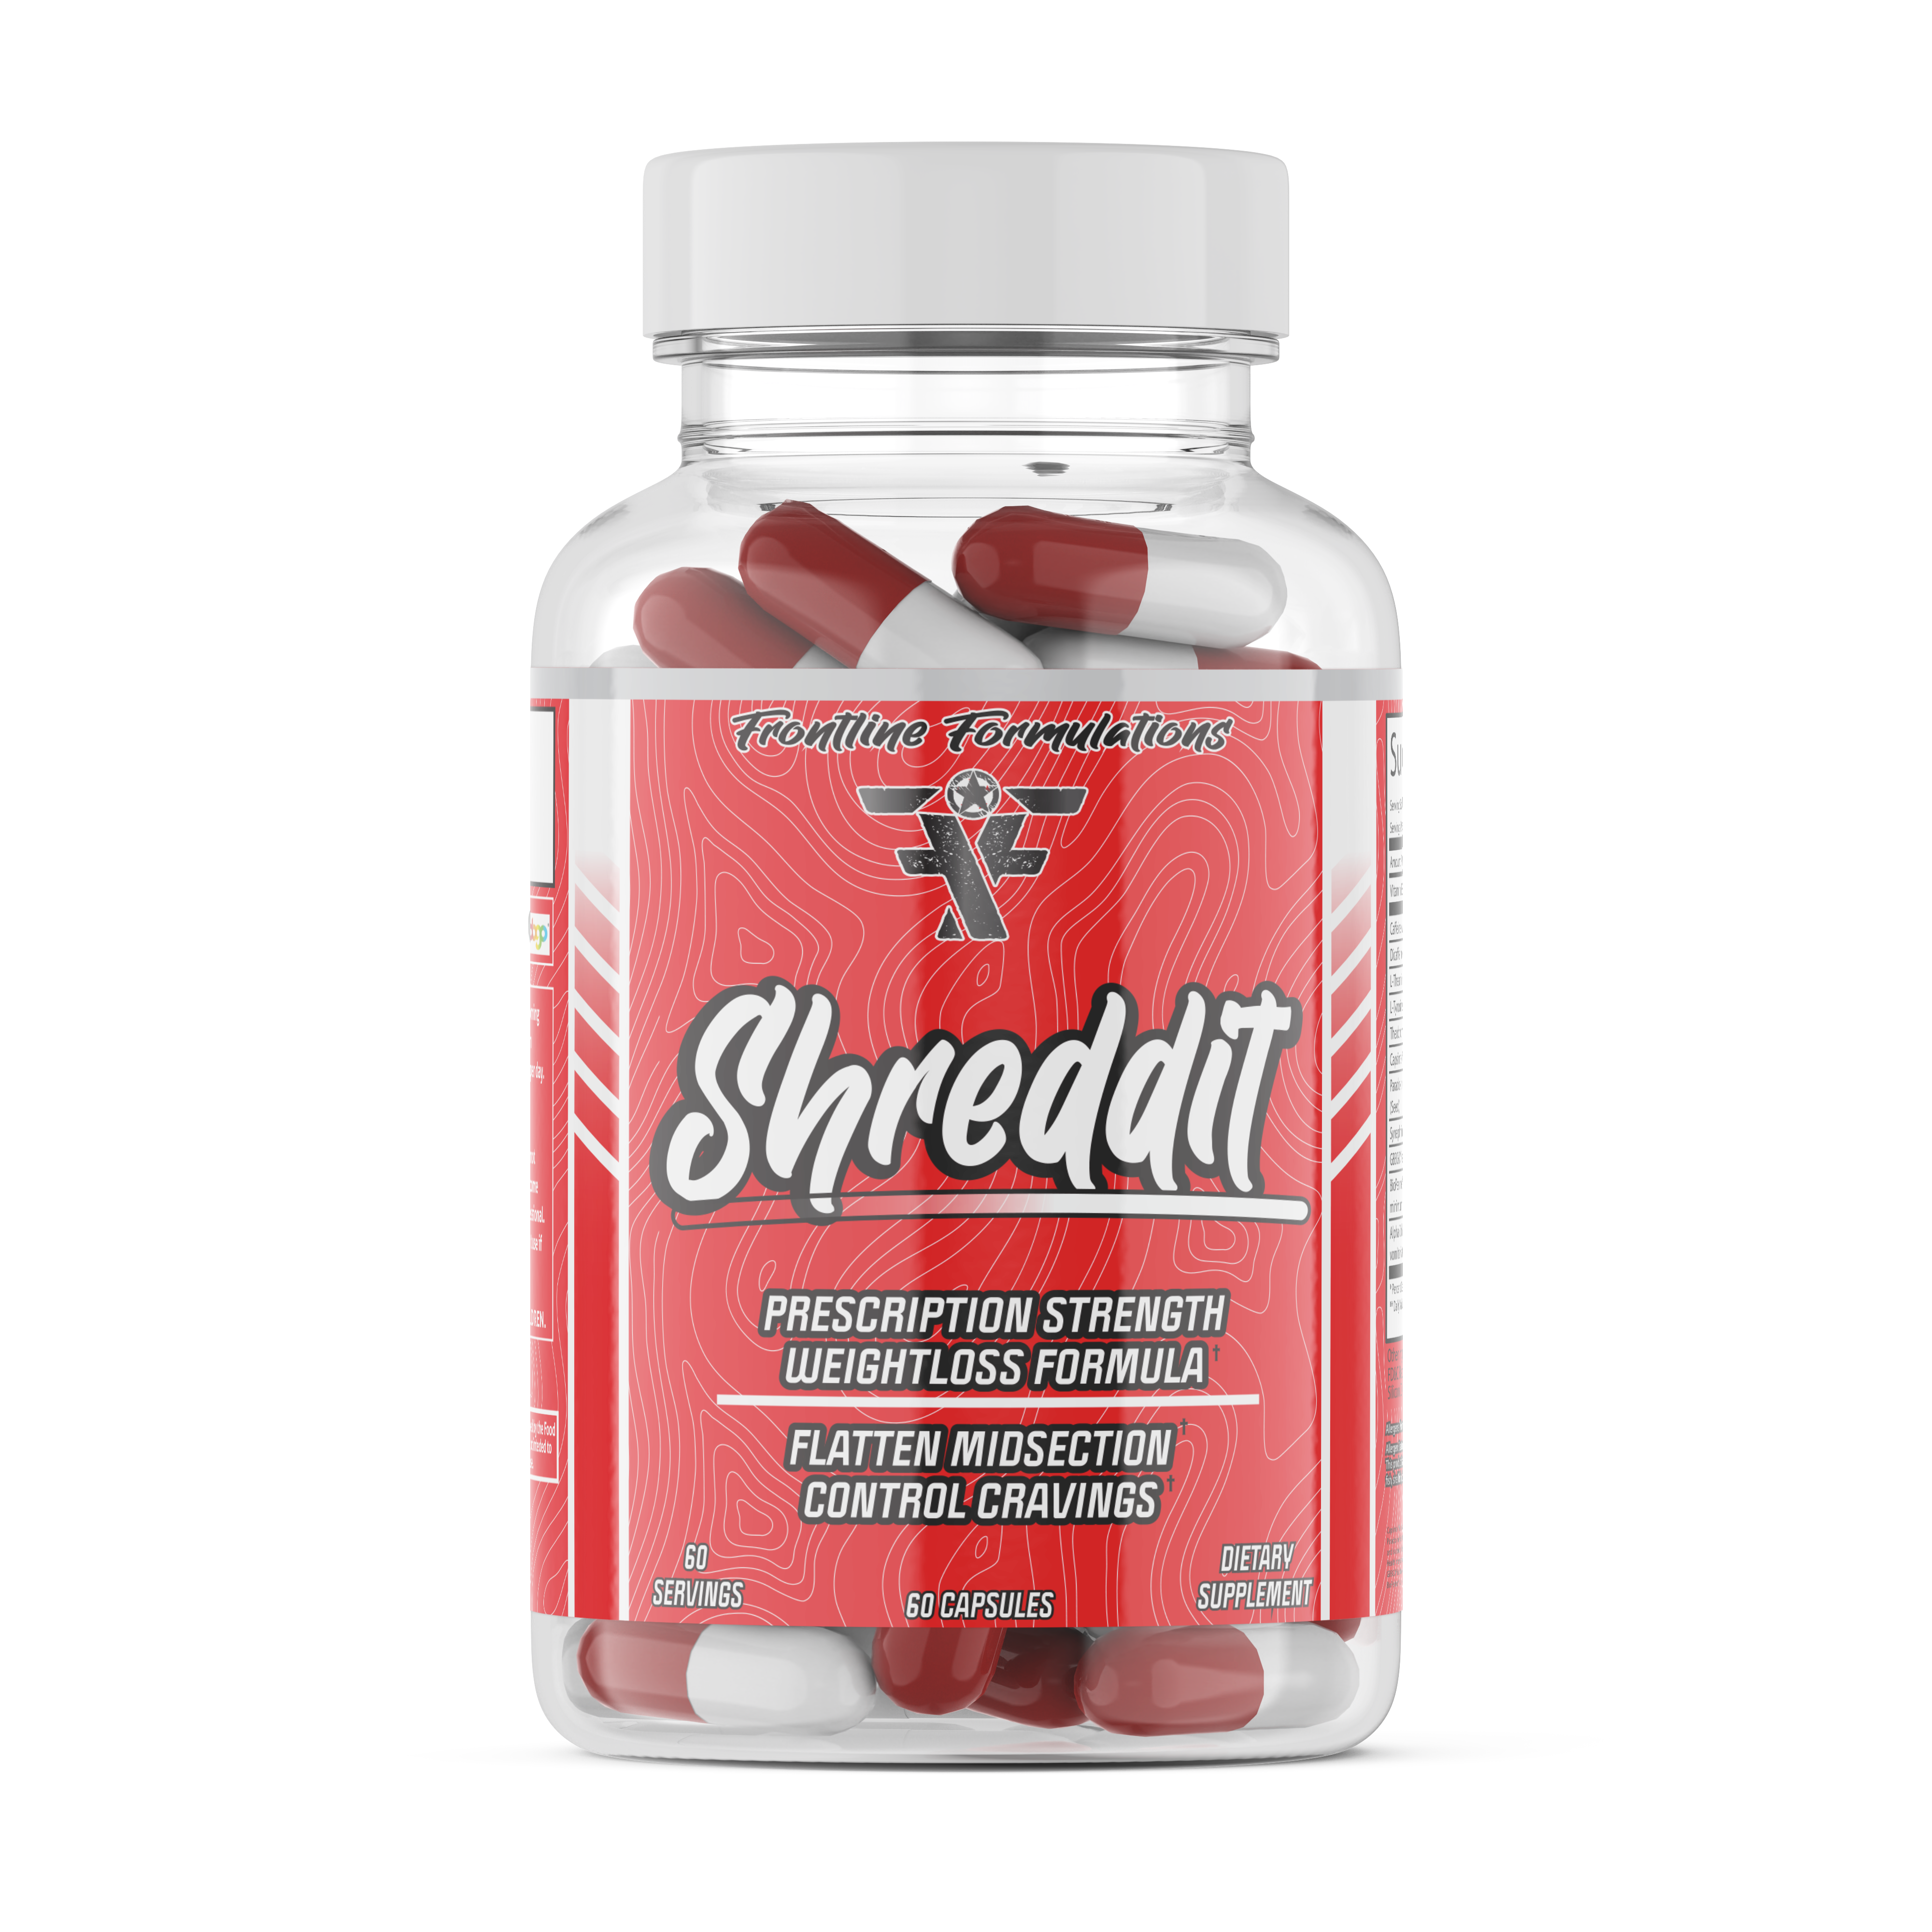 Shreddit The magical little pill! Though it may be little, it IS mighty! This is only for the most aggressive of weight loss goals. Body fat doesn't stand a chance once this formula reaches saturation point. Expect the sweat to pour once it's down the hat